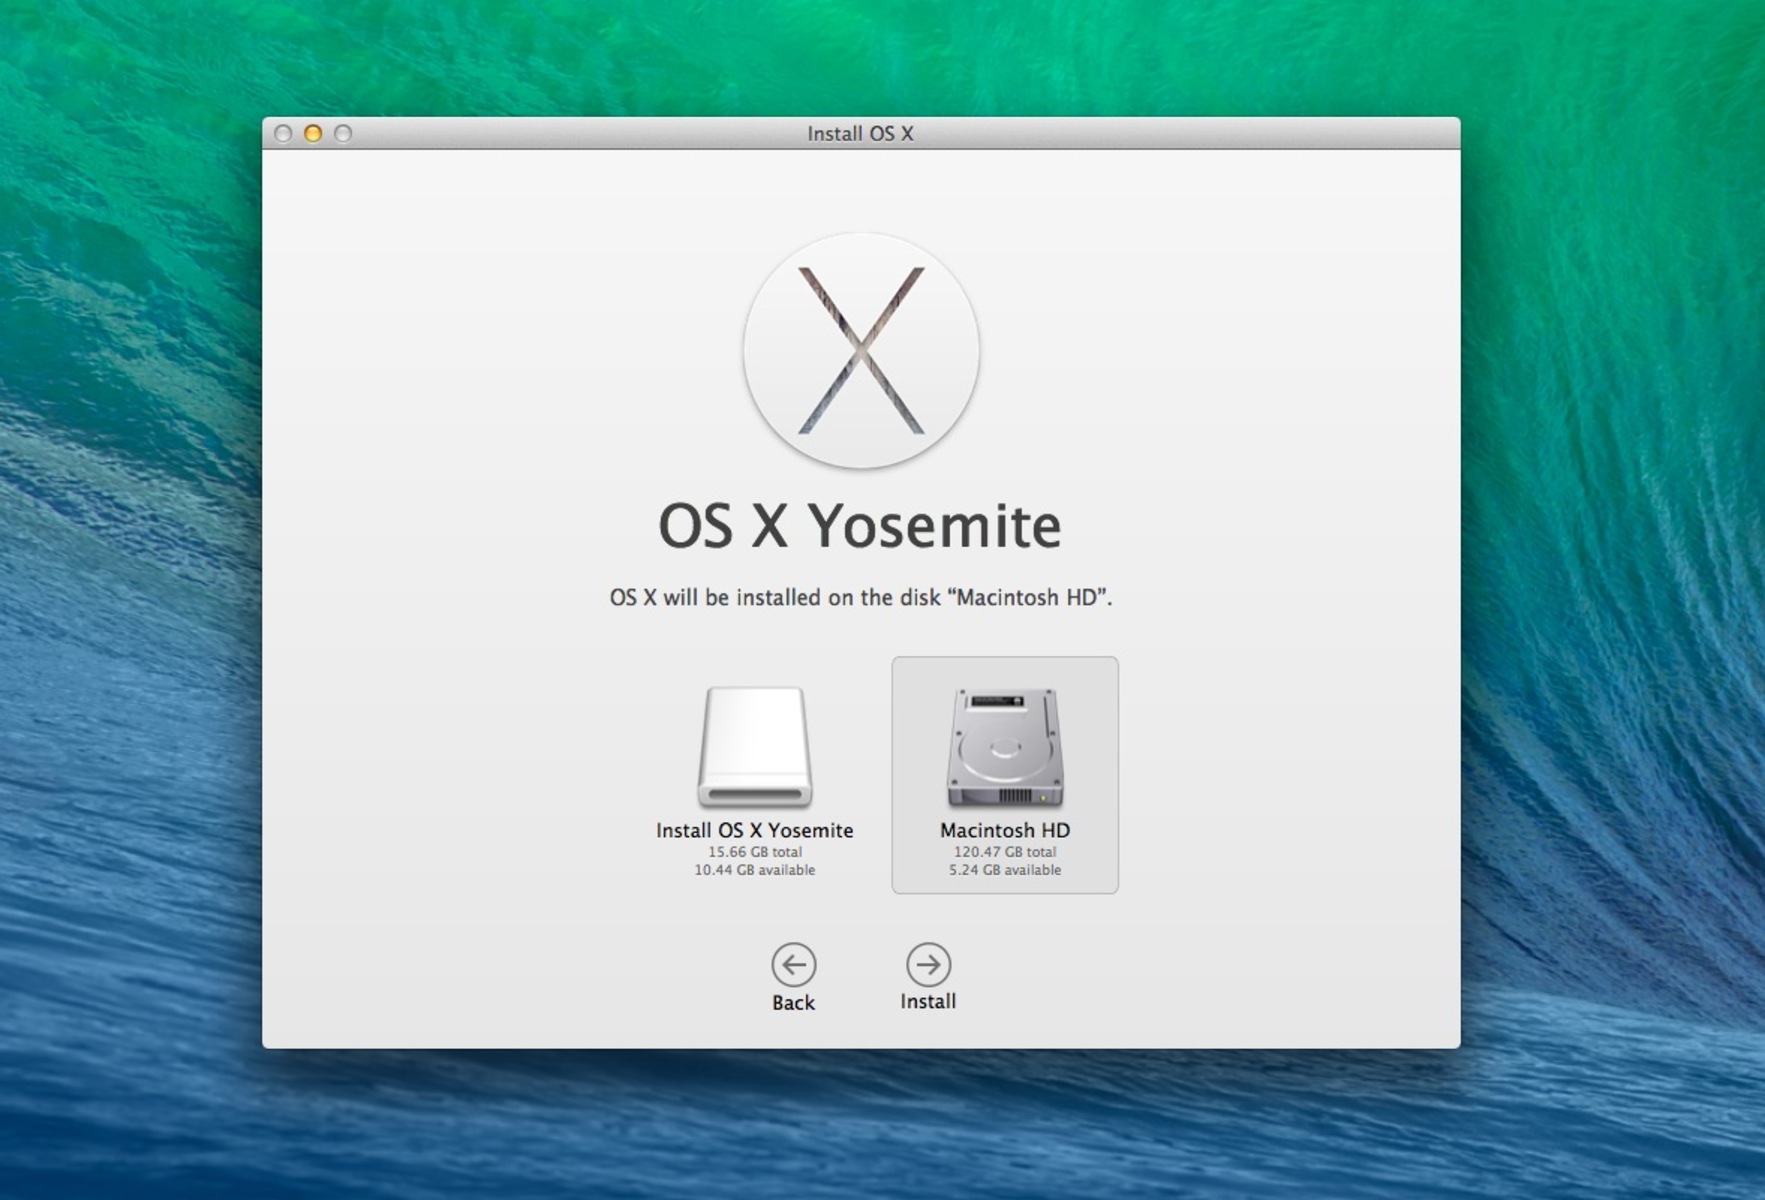 Perform A Clean Install Of OS X Yosemite On Your Mac